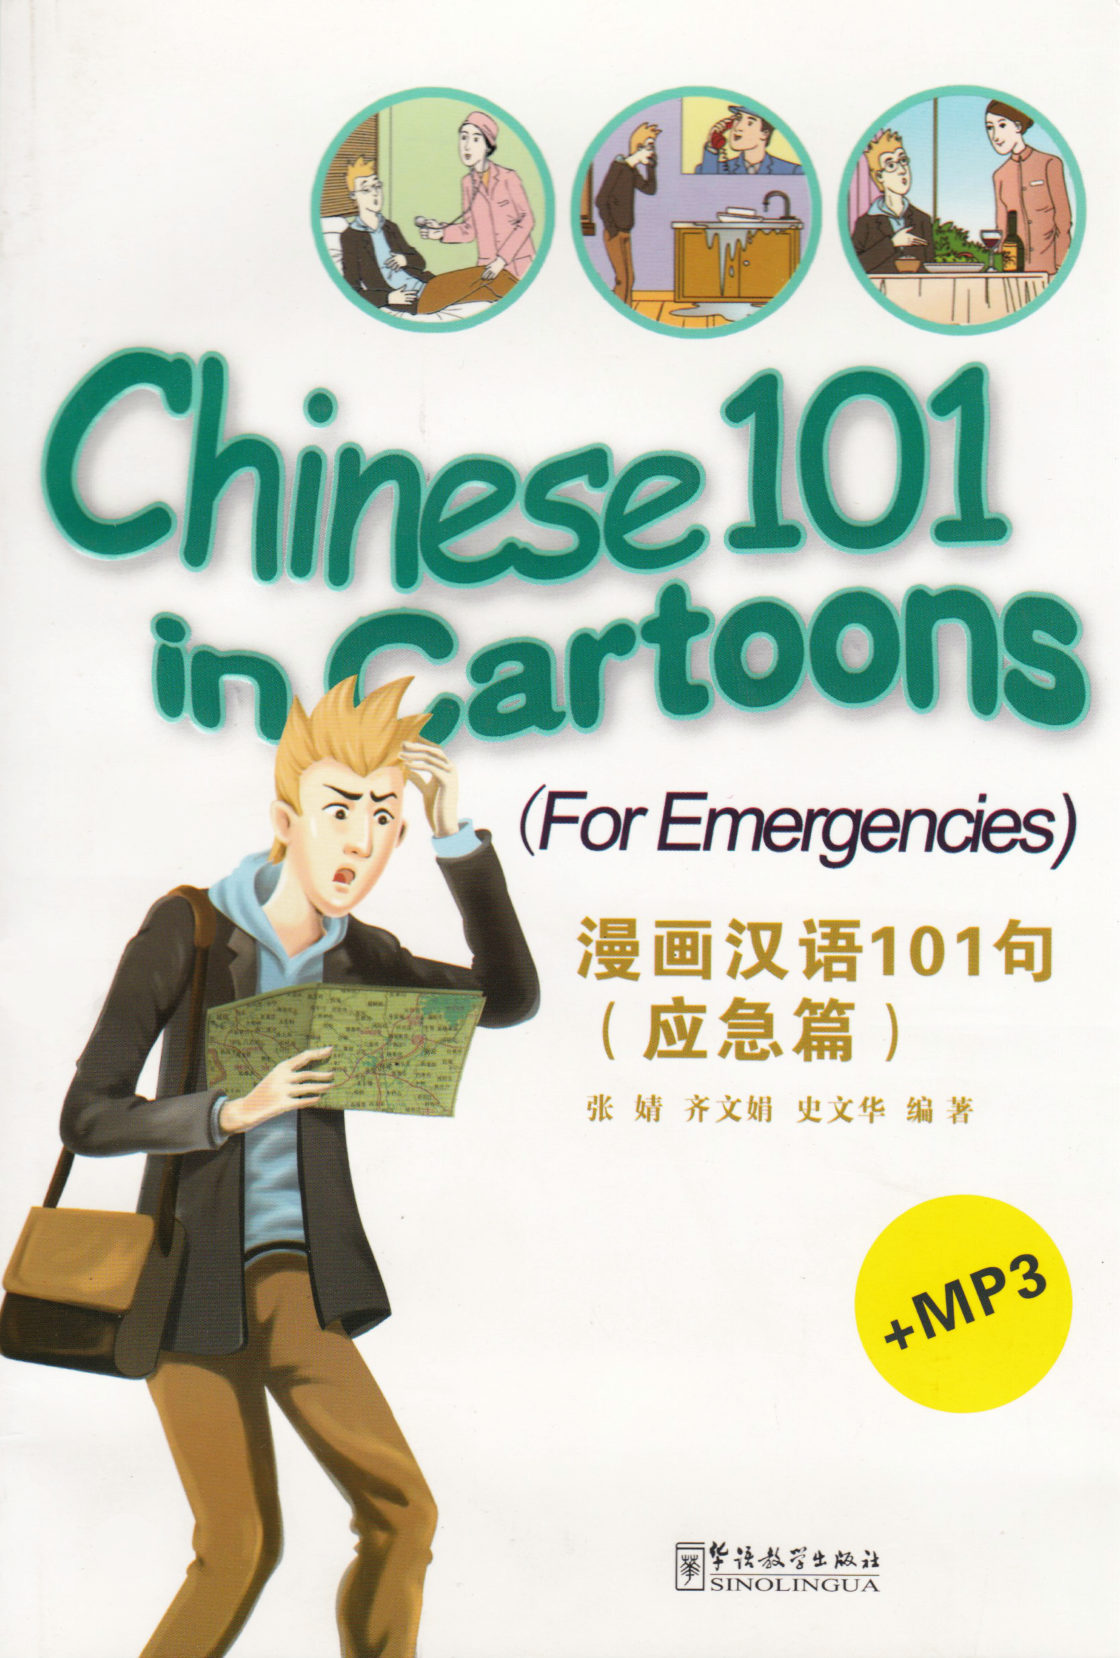 Chinese 101 in Cartoons